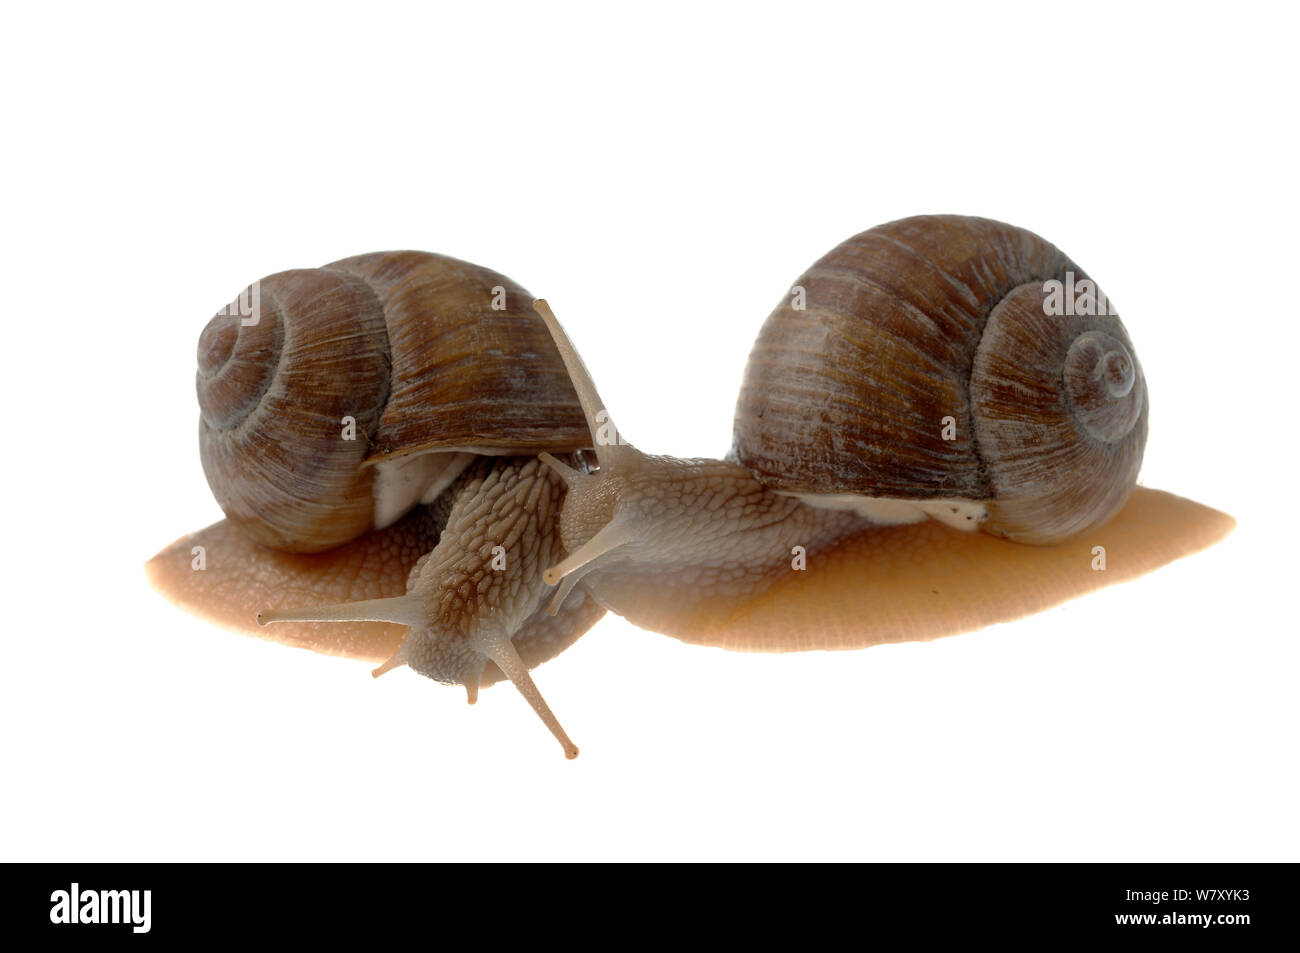 Burgundy snail (Helix pomatia) comparison of left and right handed shells, Hassloch, Rhineland-Palatinate, Germany, October. meetyourneighbours.net project Stock Photo